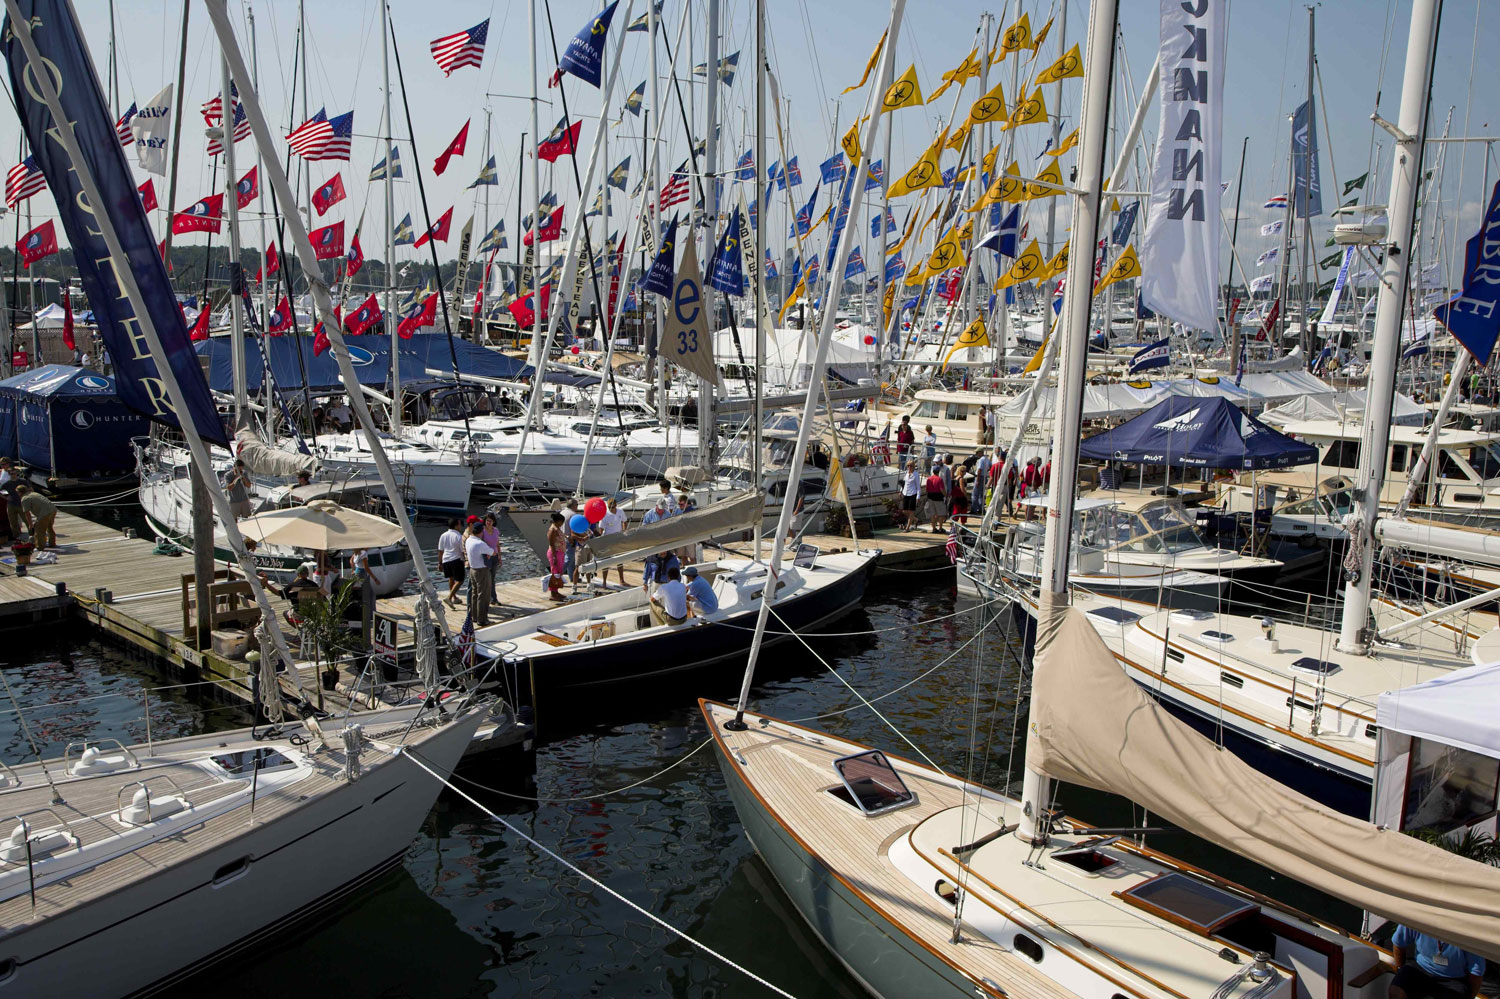 Boats on display at the Newport International Boat Show